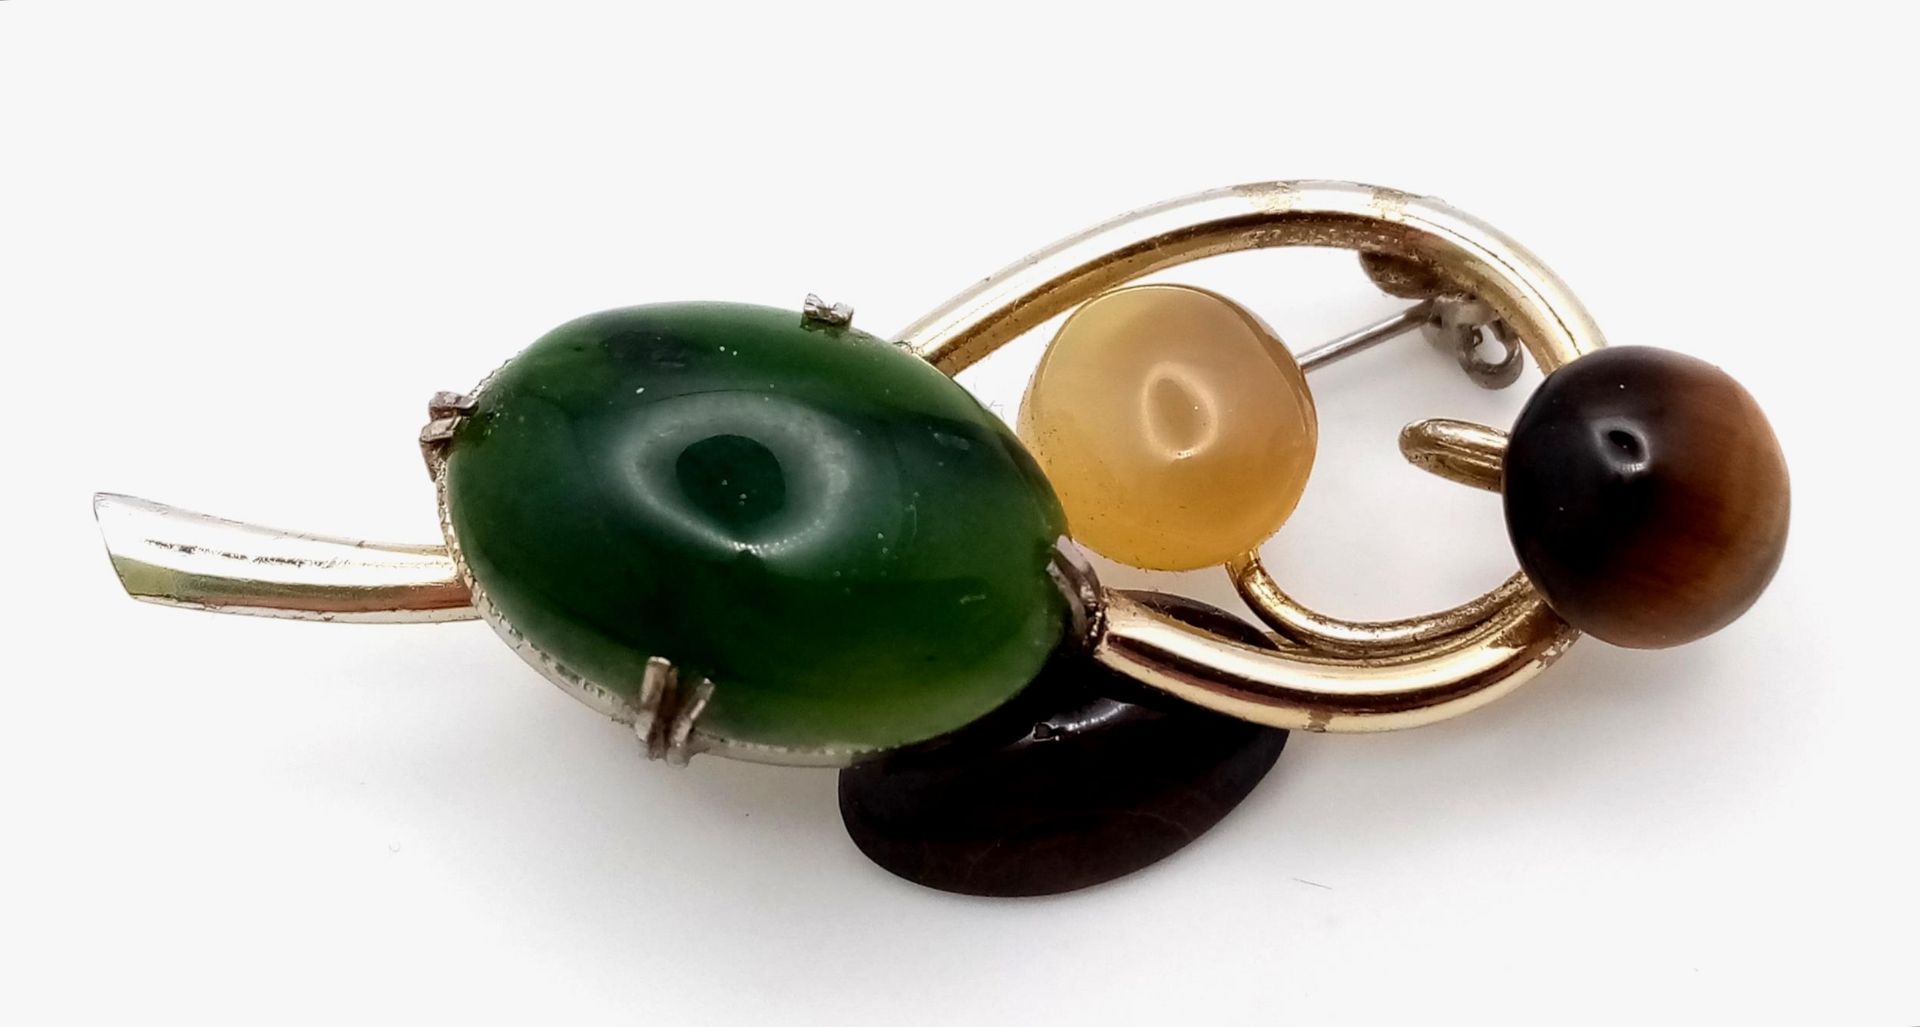 A Magical, Music Note Styled Multi-Gemstone Brooch. Jade, tigers eye, moonstone and agate hit the